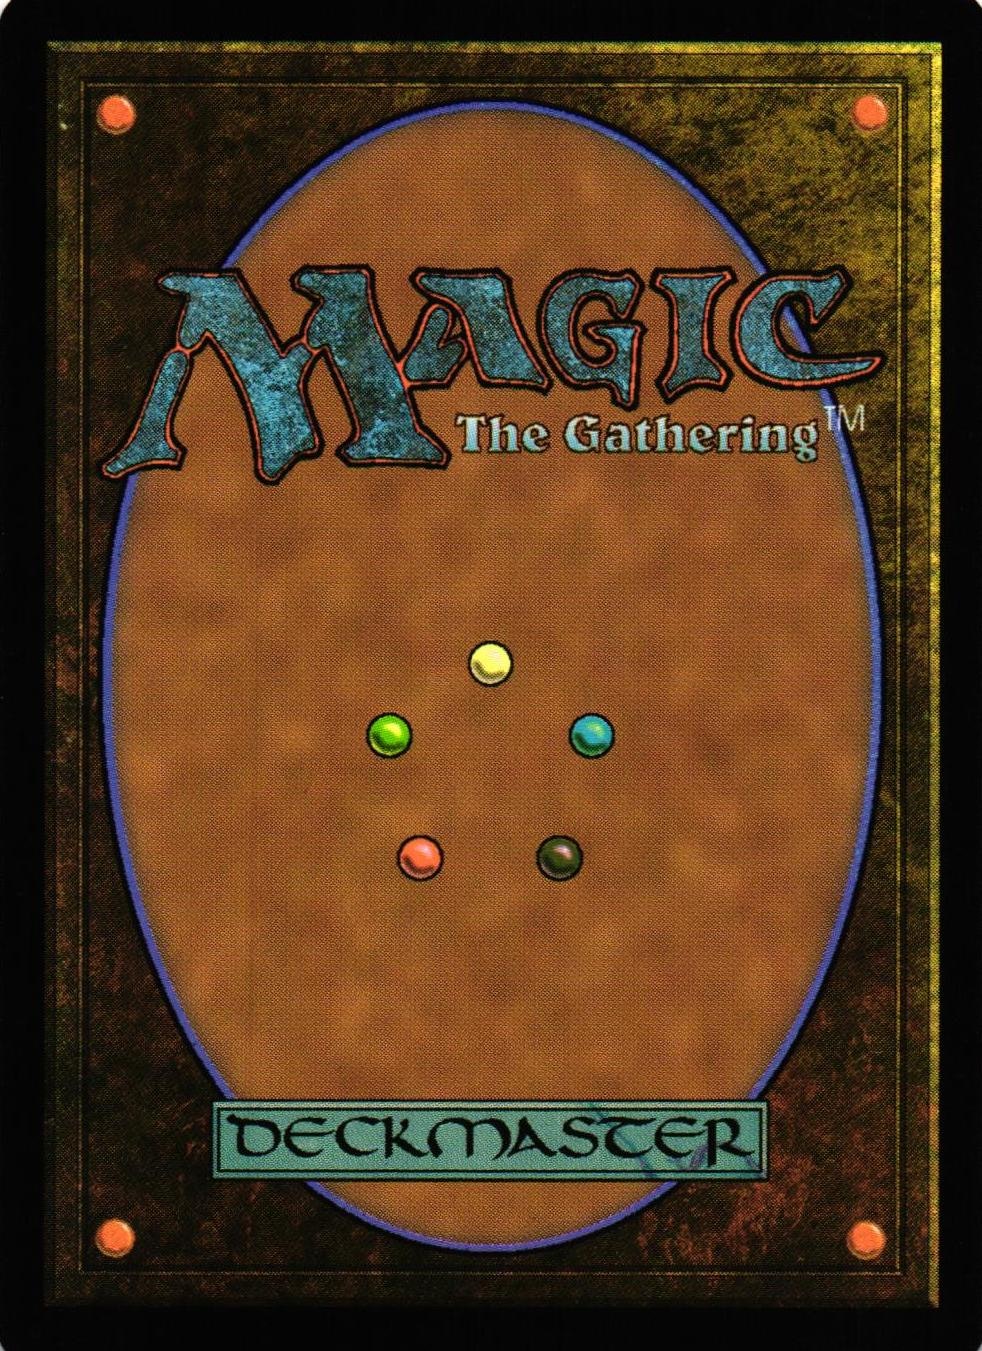 Vizier of the True Uncommon 028/199 Hour of Devesation (HOU) Magic the Gathering